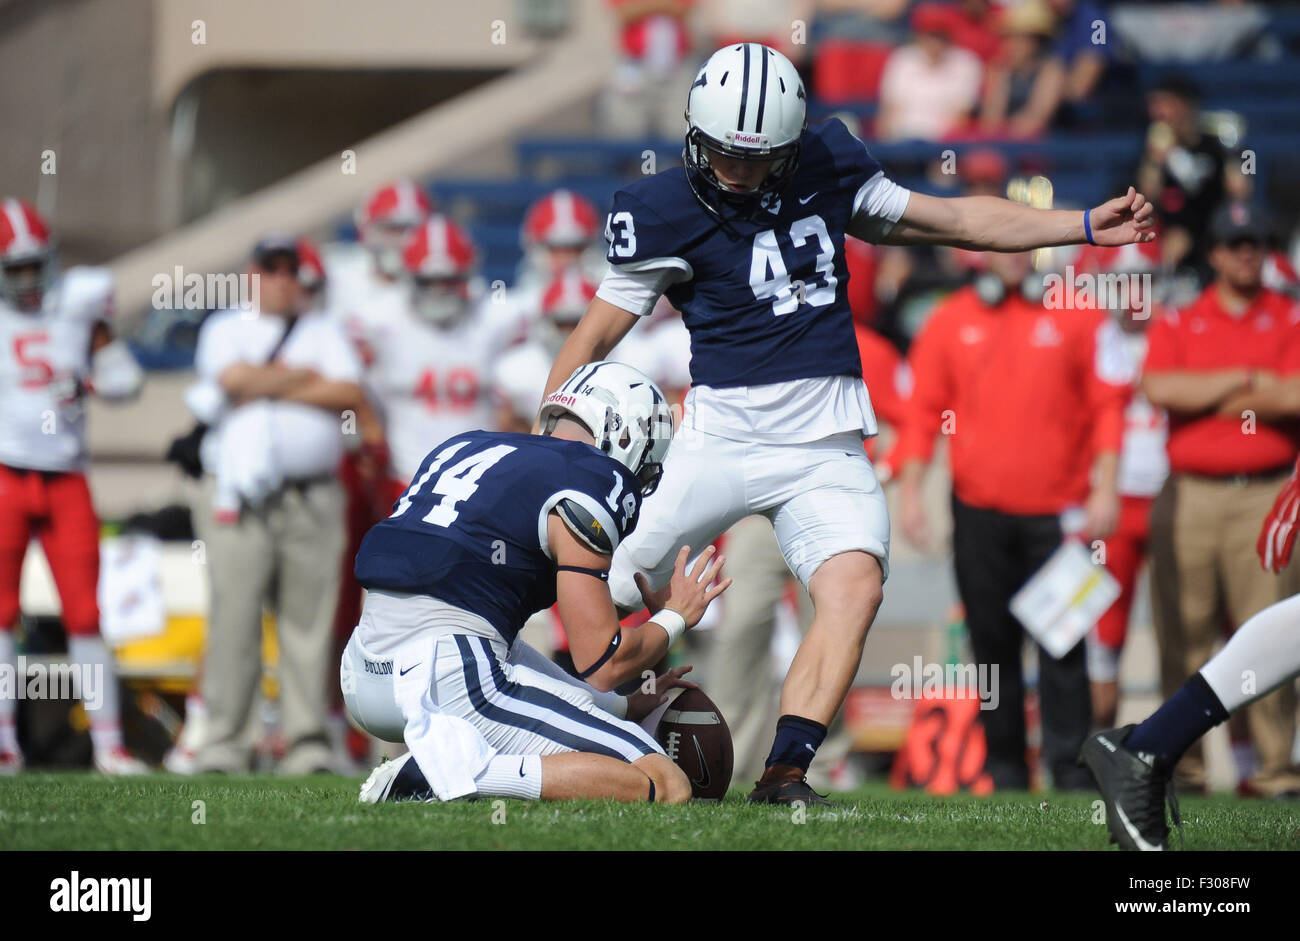 Bryan Holmes (43) in action during a game between the Yale Bulldogs and the Cornell Big Red at the Yale Bowl on September 26, 2015 in New Haven, Connecticut.(Gregory Vasil/Cal Sport Media) Stock Photo